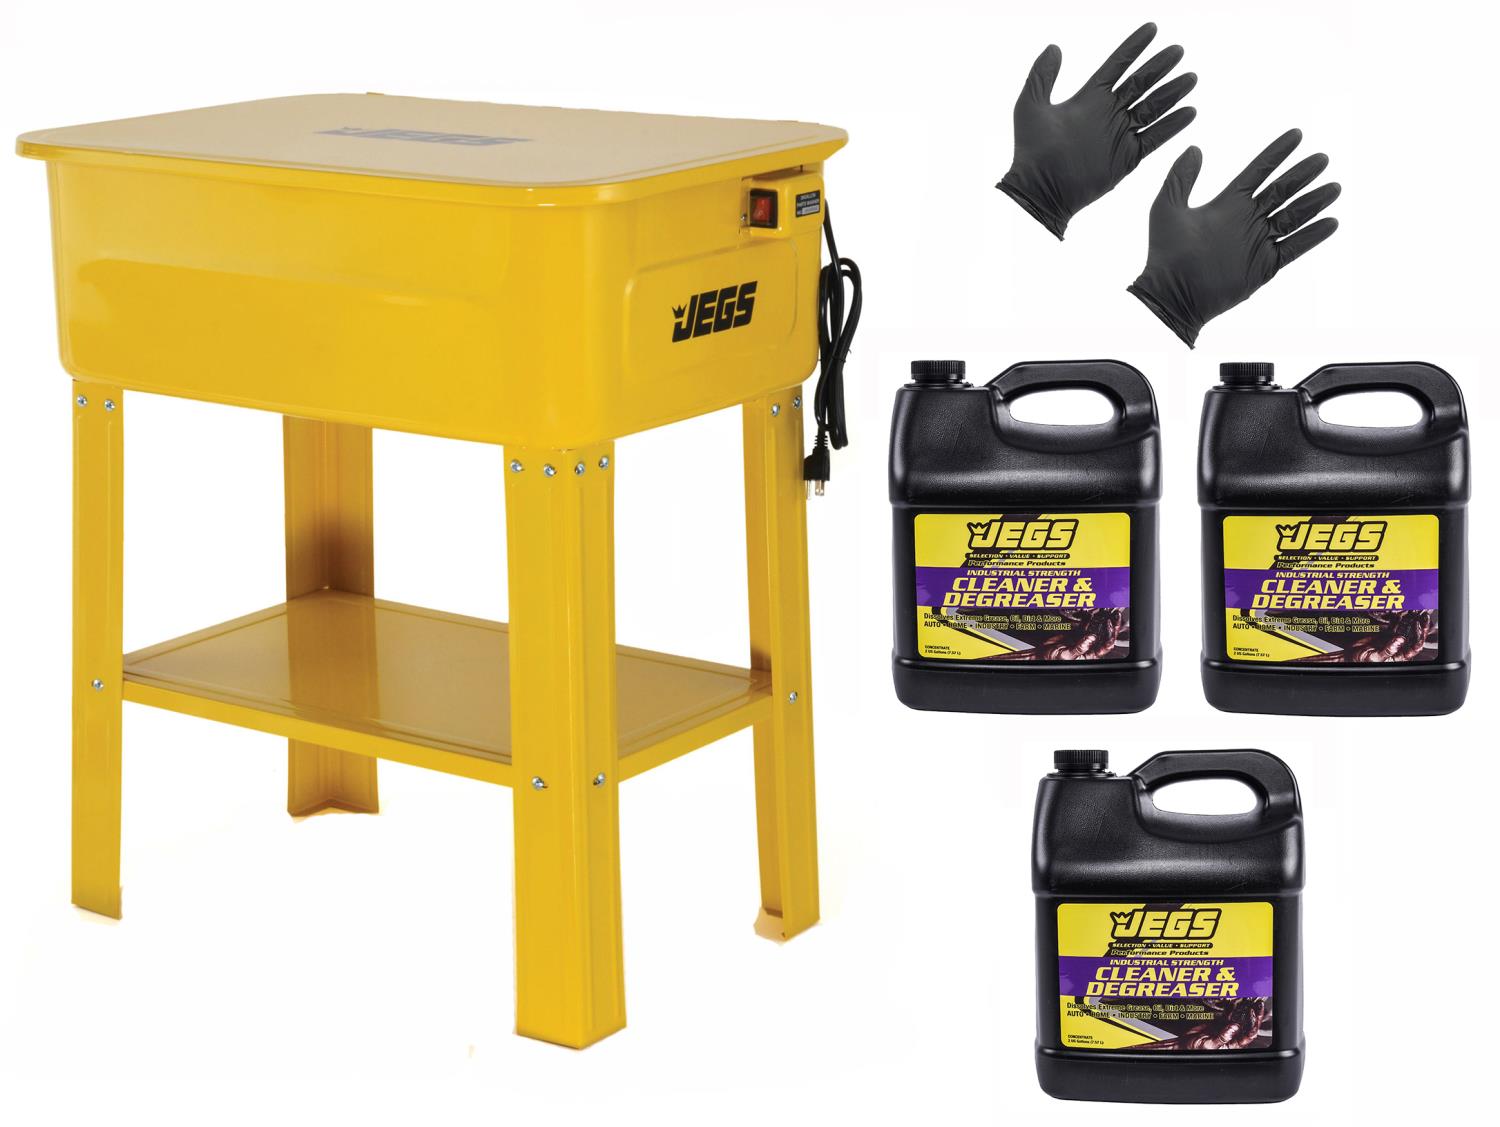 Parts Washer Kit with 3 Two Gallon Bottles of Cleaner/Degreaser & X-Large Gloves [20-Gallon Tank]